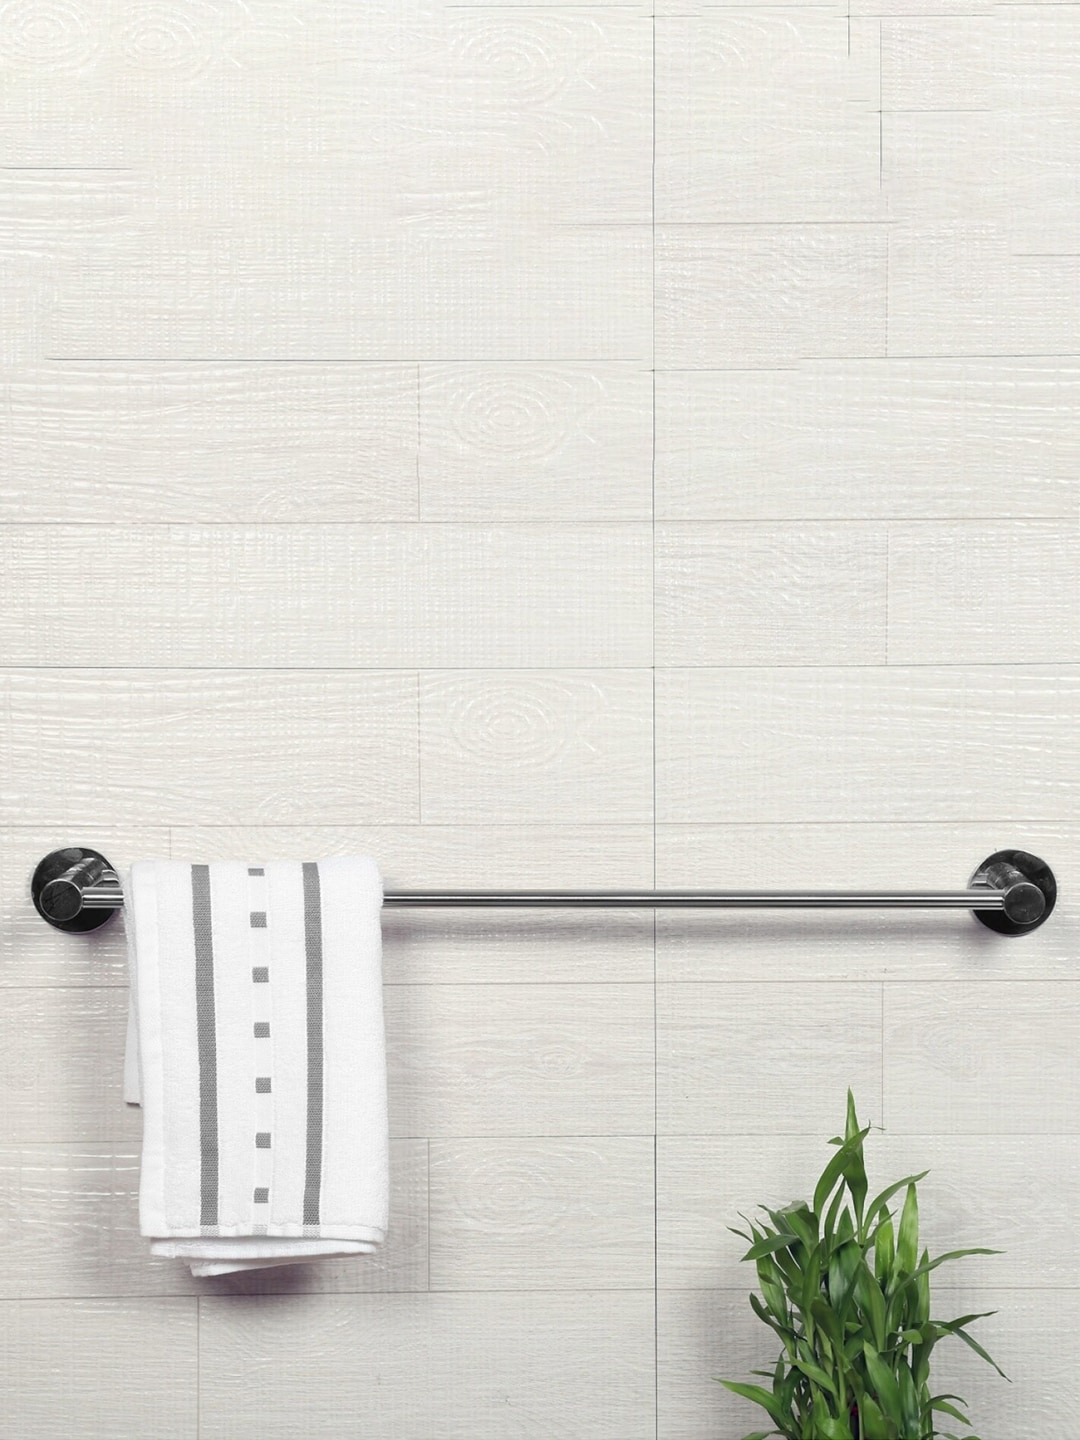 Home Centre Silver-Toned Adrian Aeron Stainless Steel Towel Holder Price in India